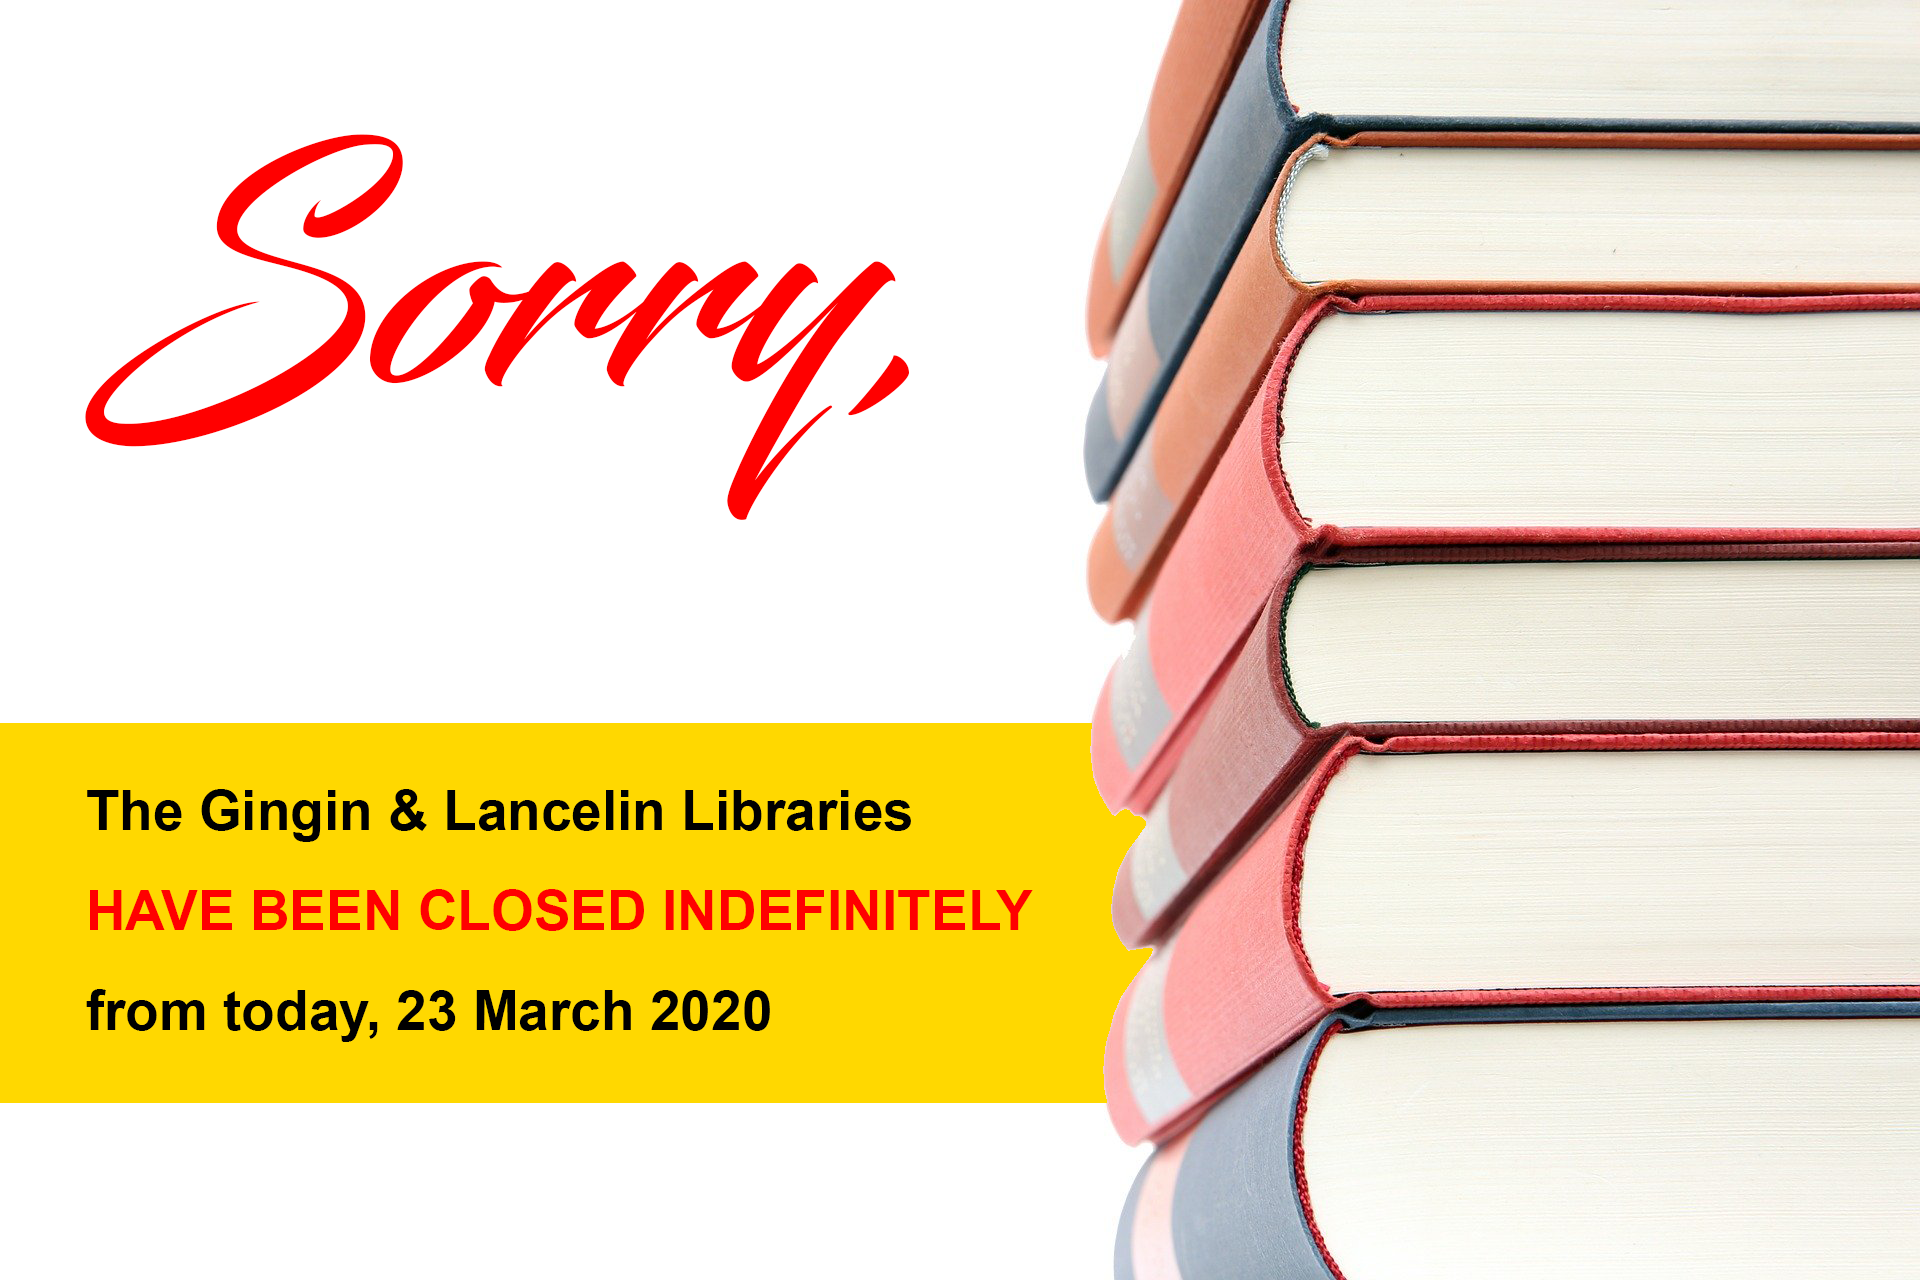 Closure of the Gingin & Lancelin Libraries